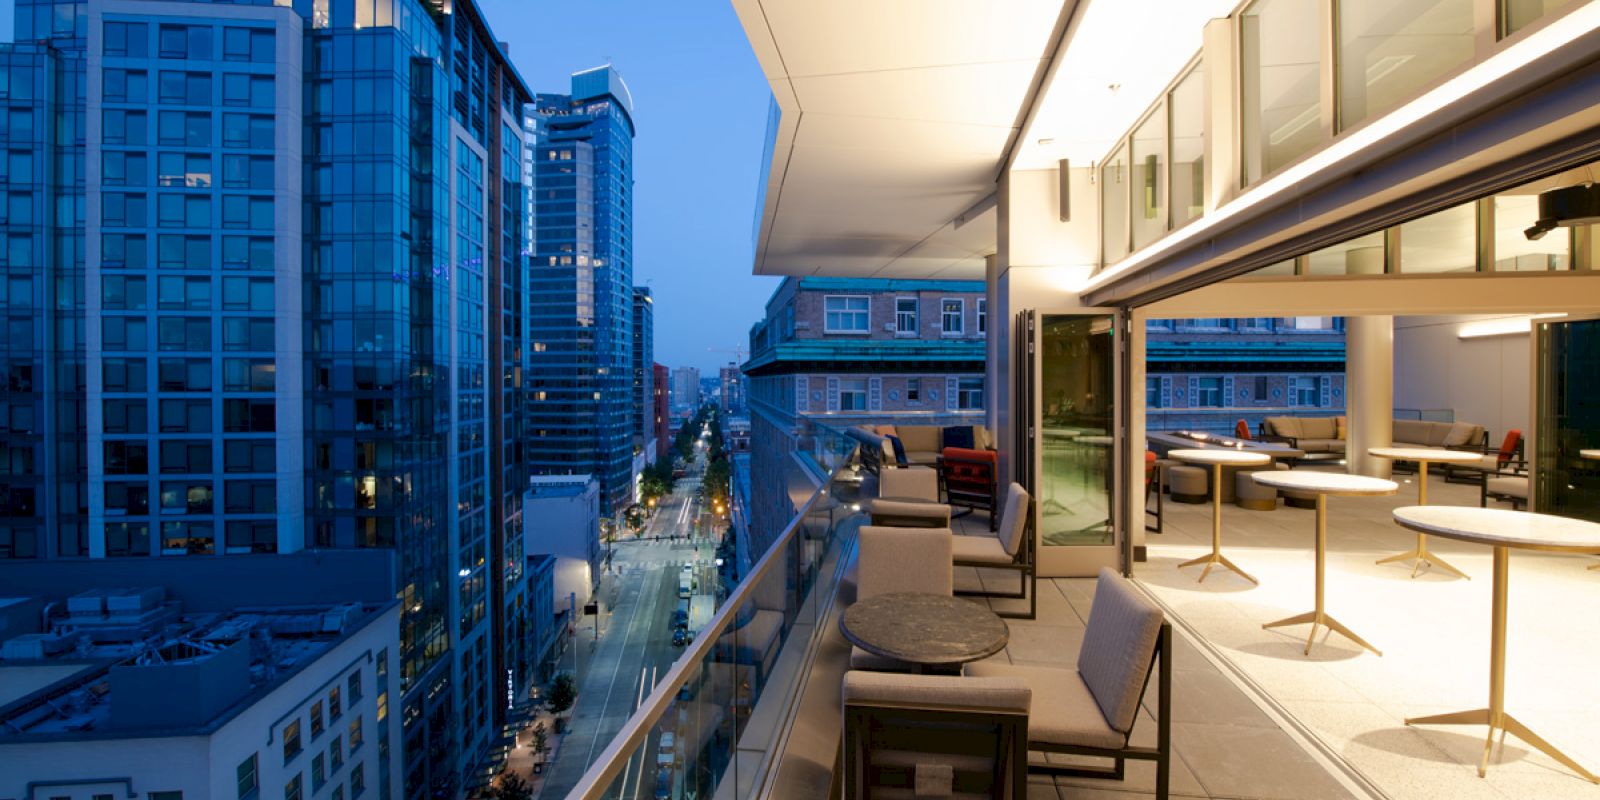 The image shows a modern cityscape at dusk, with a balcony featuring seating and tables overlooking tall buildings and a street.